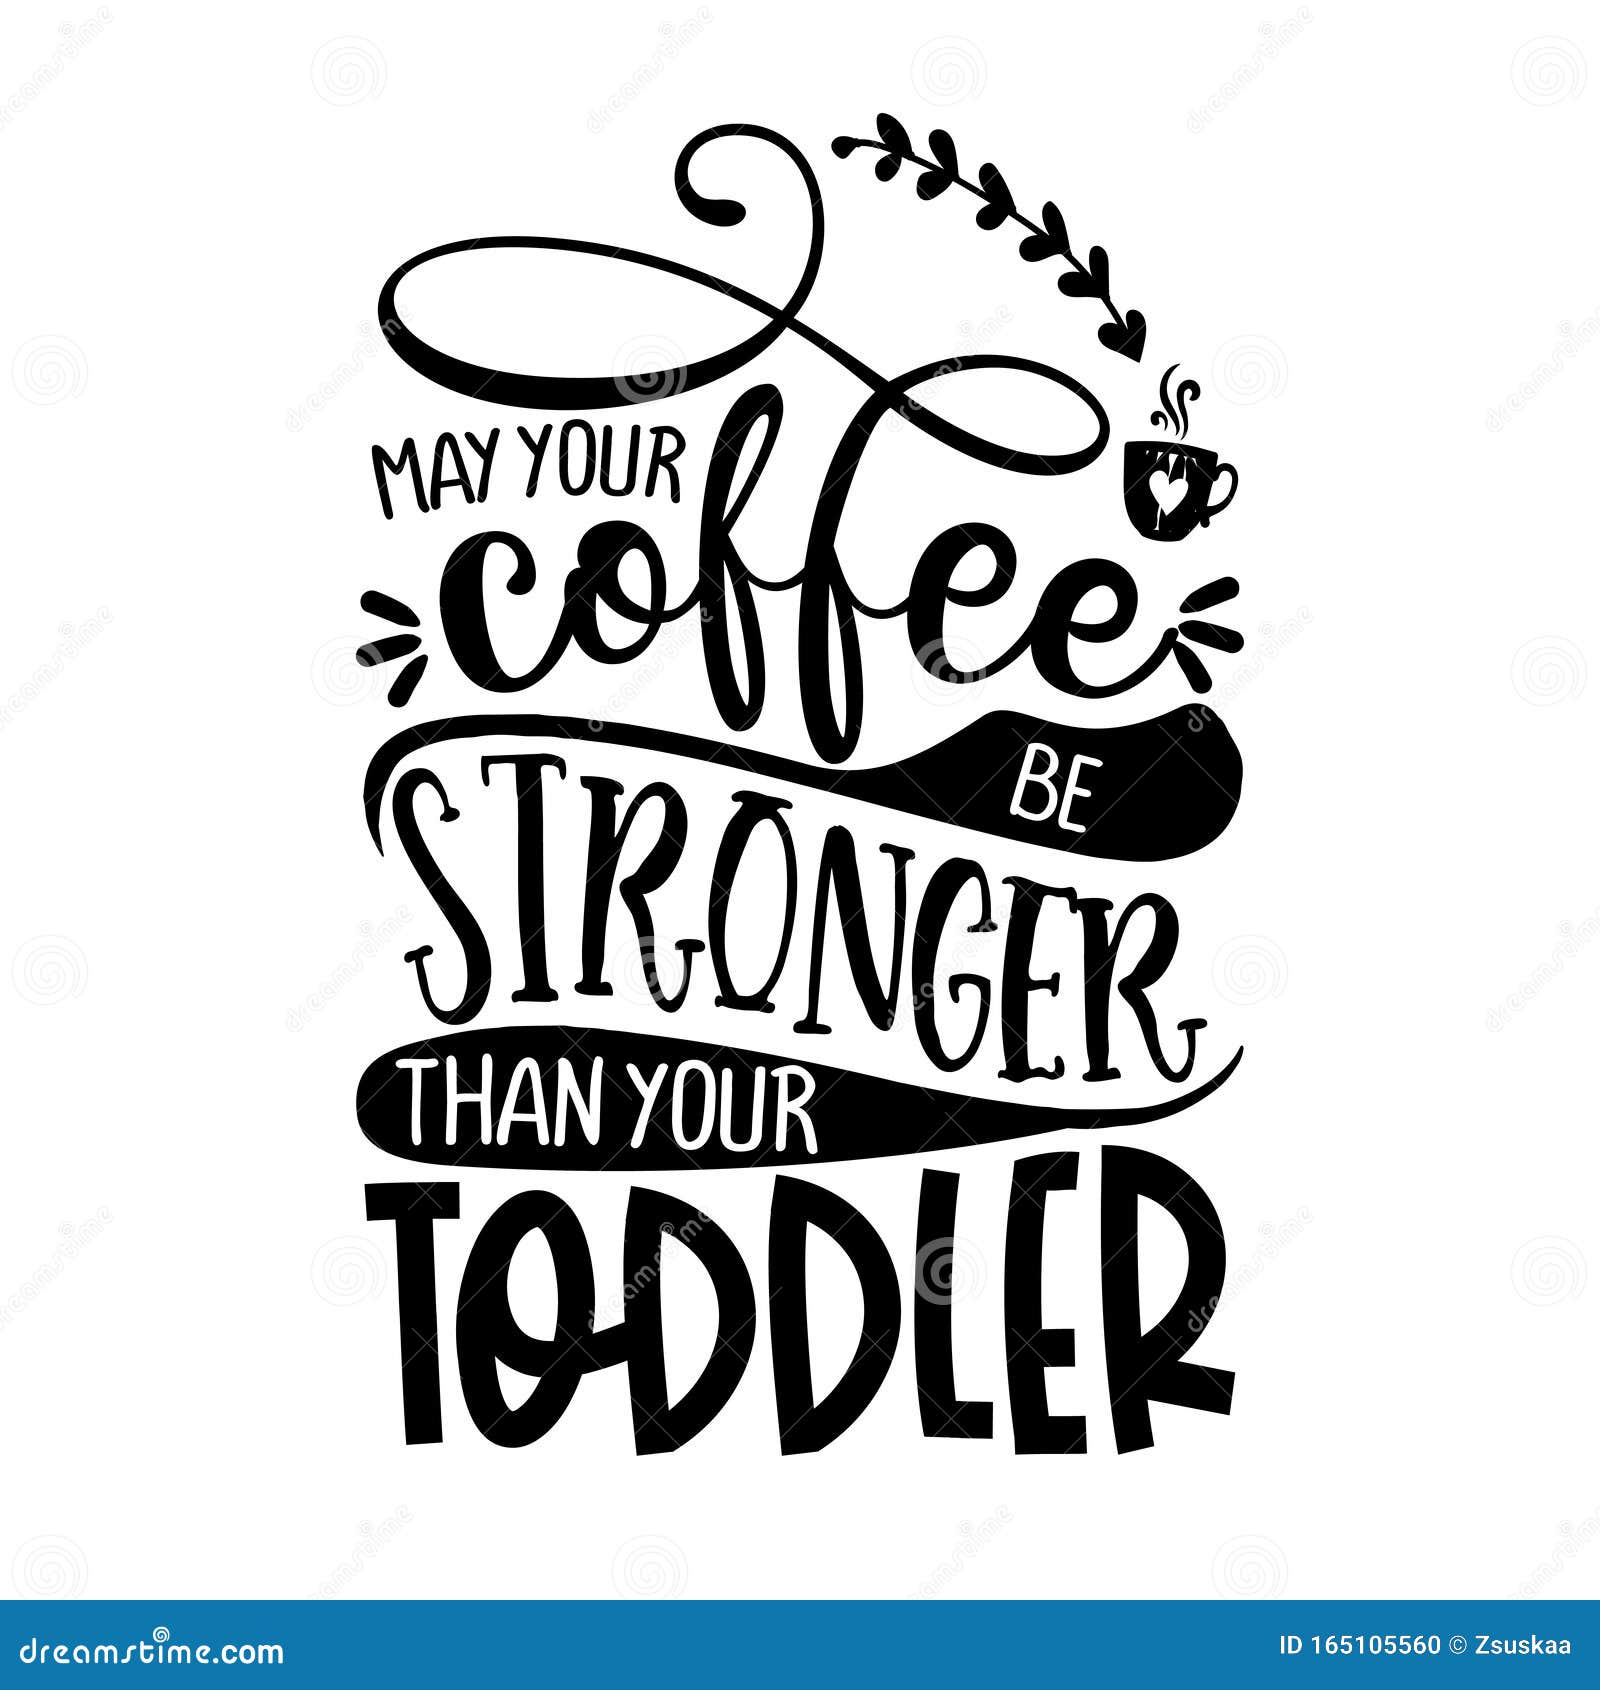 May Your Coffee Be Stronger Than Your Toddler Front & Back Coffee